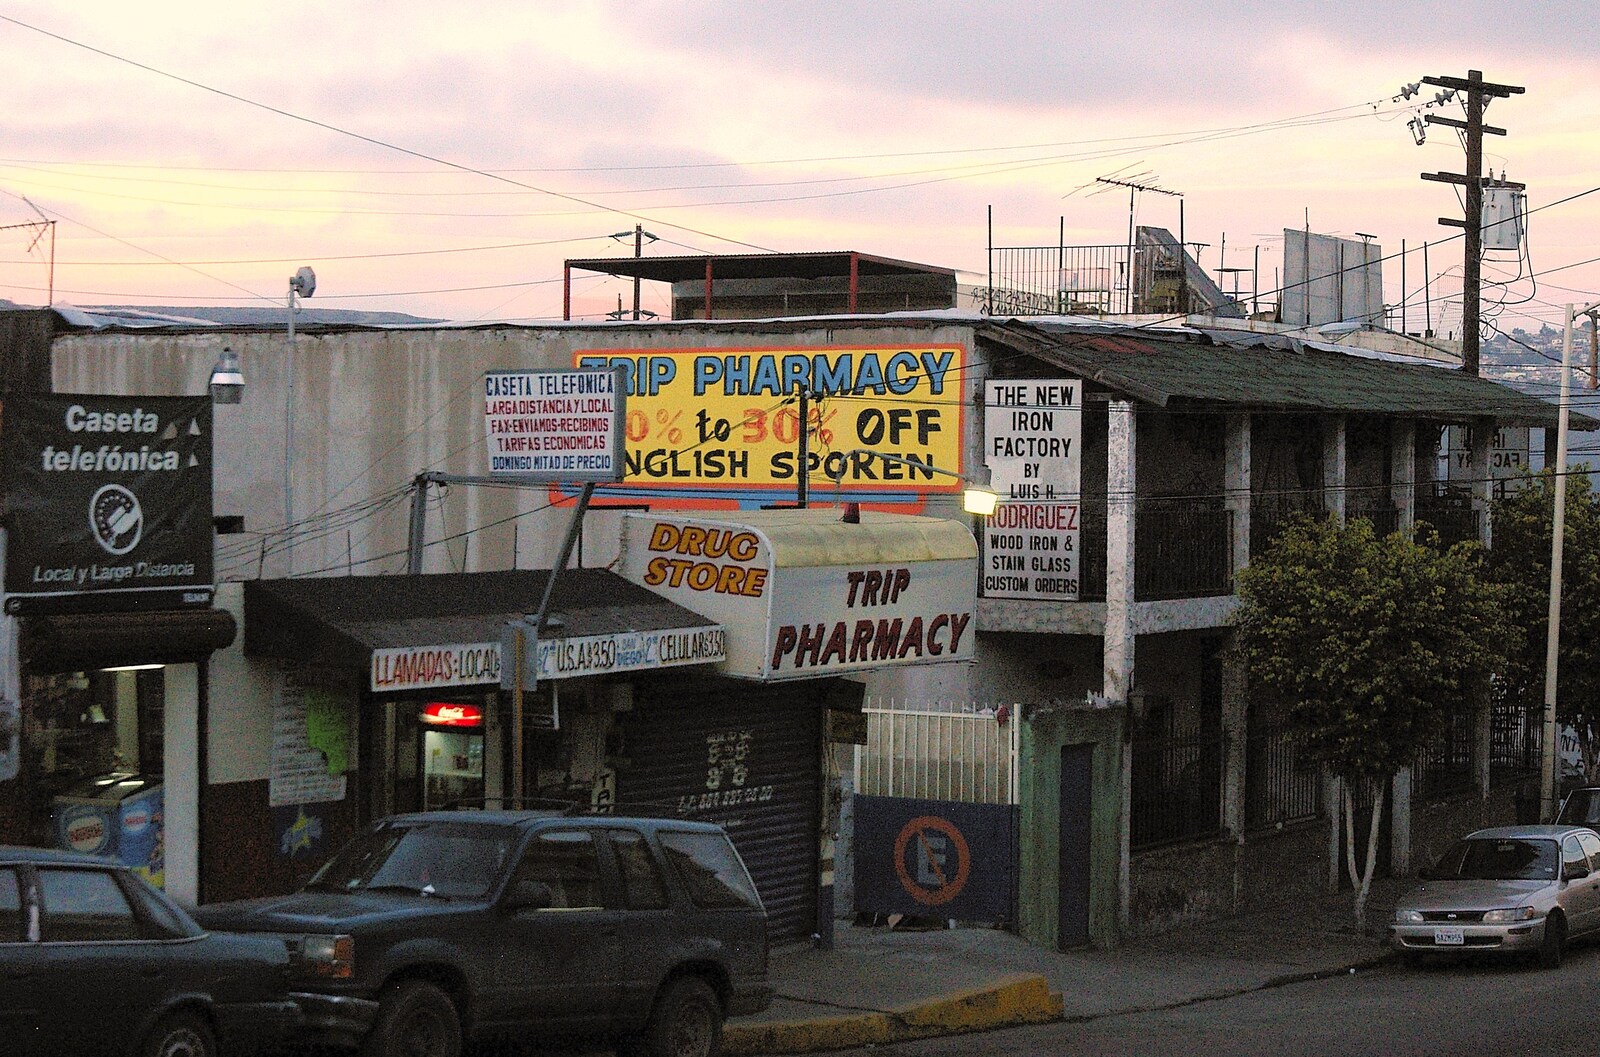 Another Tijuana pharmacy from A Trip to Tijuana, Mexico - 25th March 2006